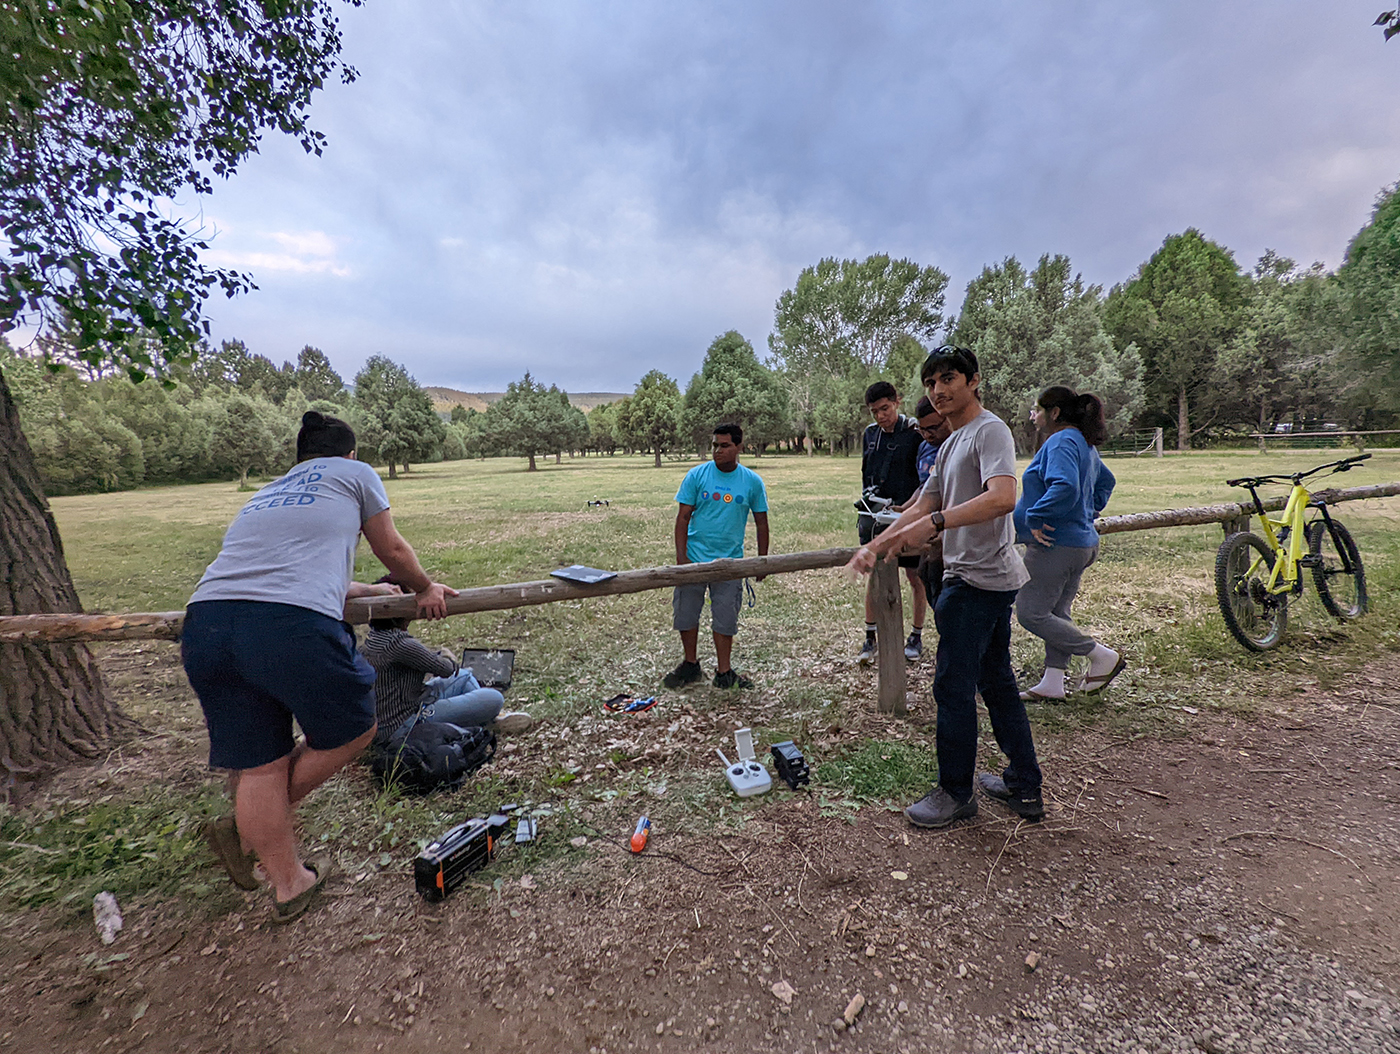 SMU-in-Taos students work with drones near a fence